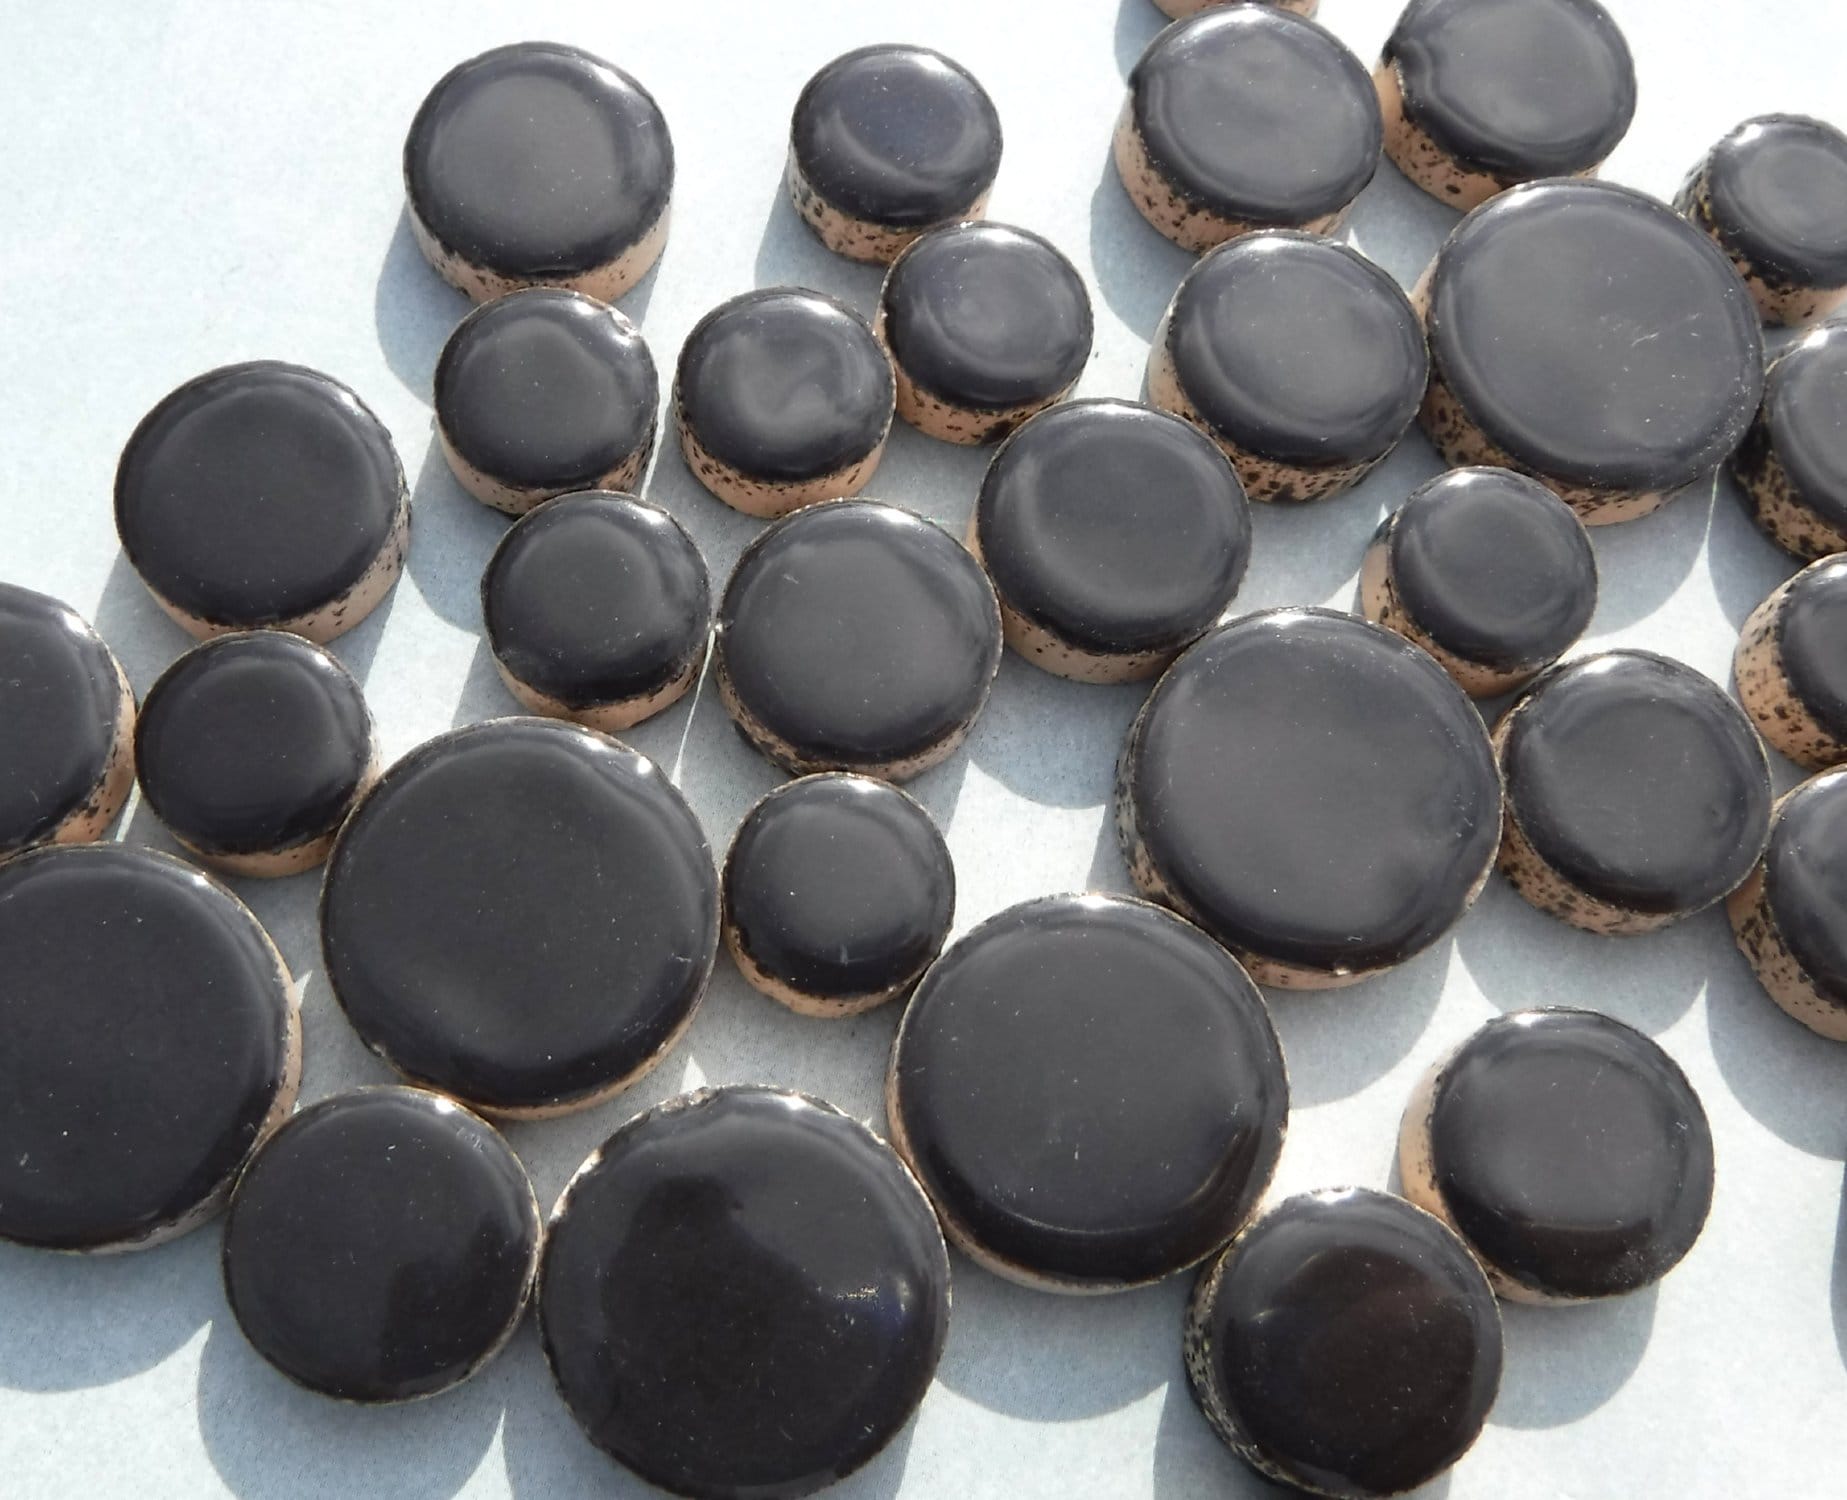 Black Circles Mosaic Tiles - 50g Ceramic in Mix of 3 Sizes 1/2" and 3/4" and 5/8"